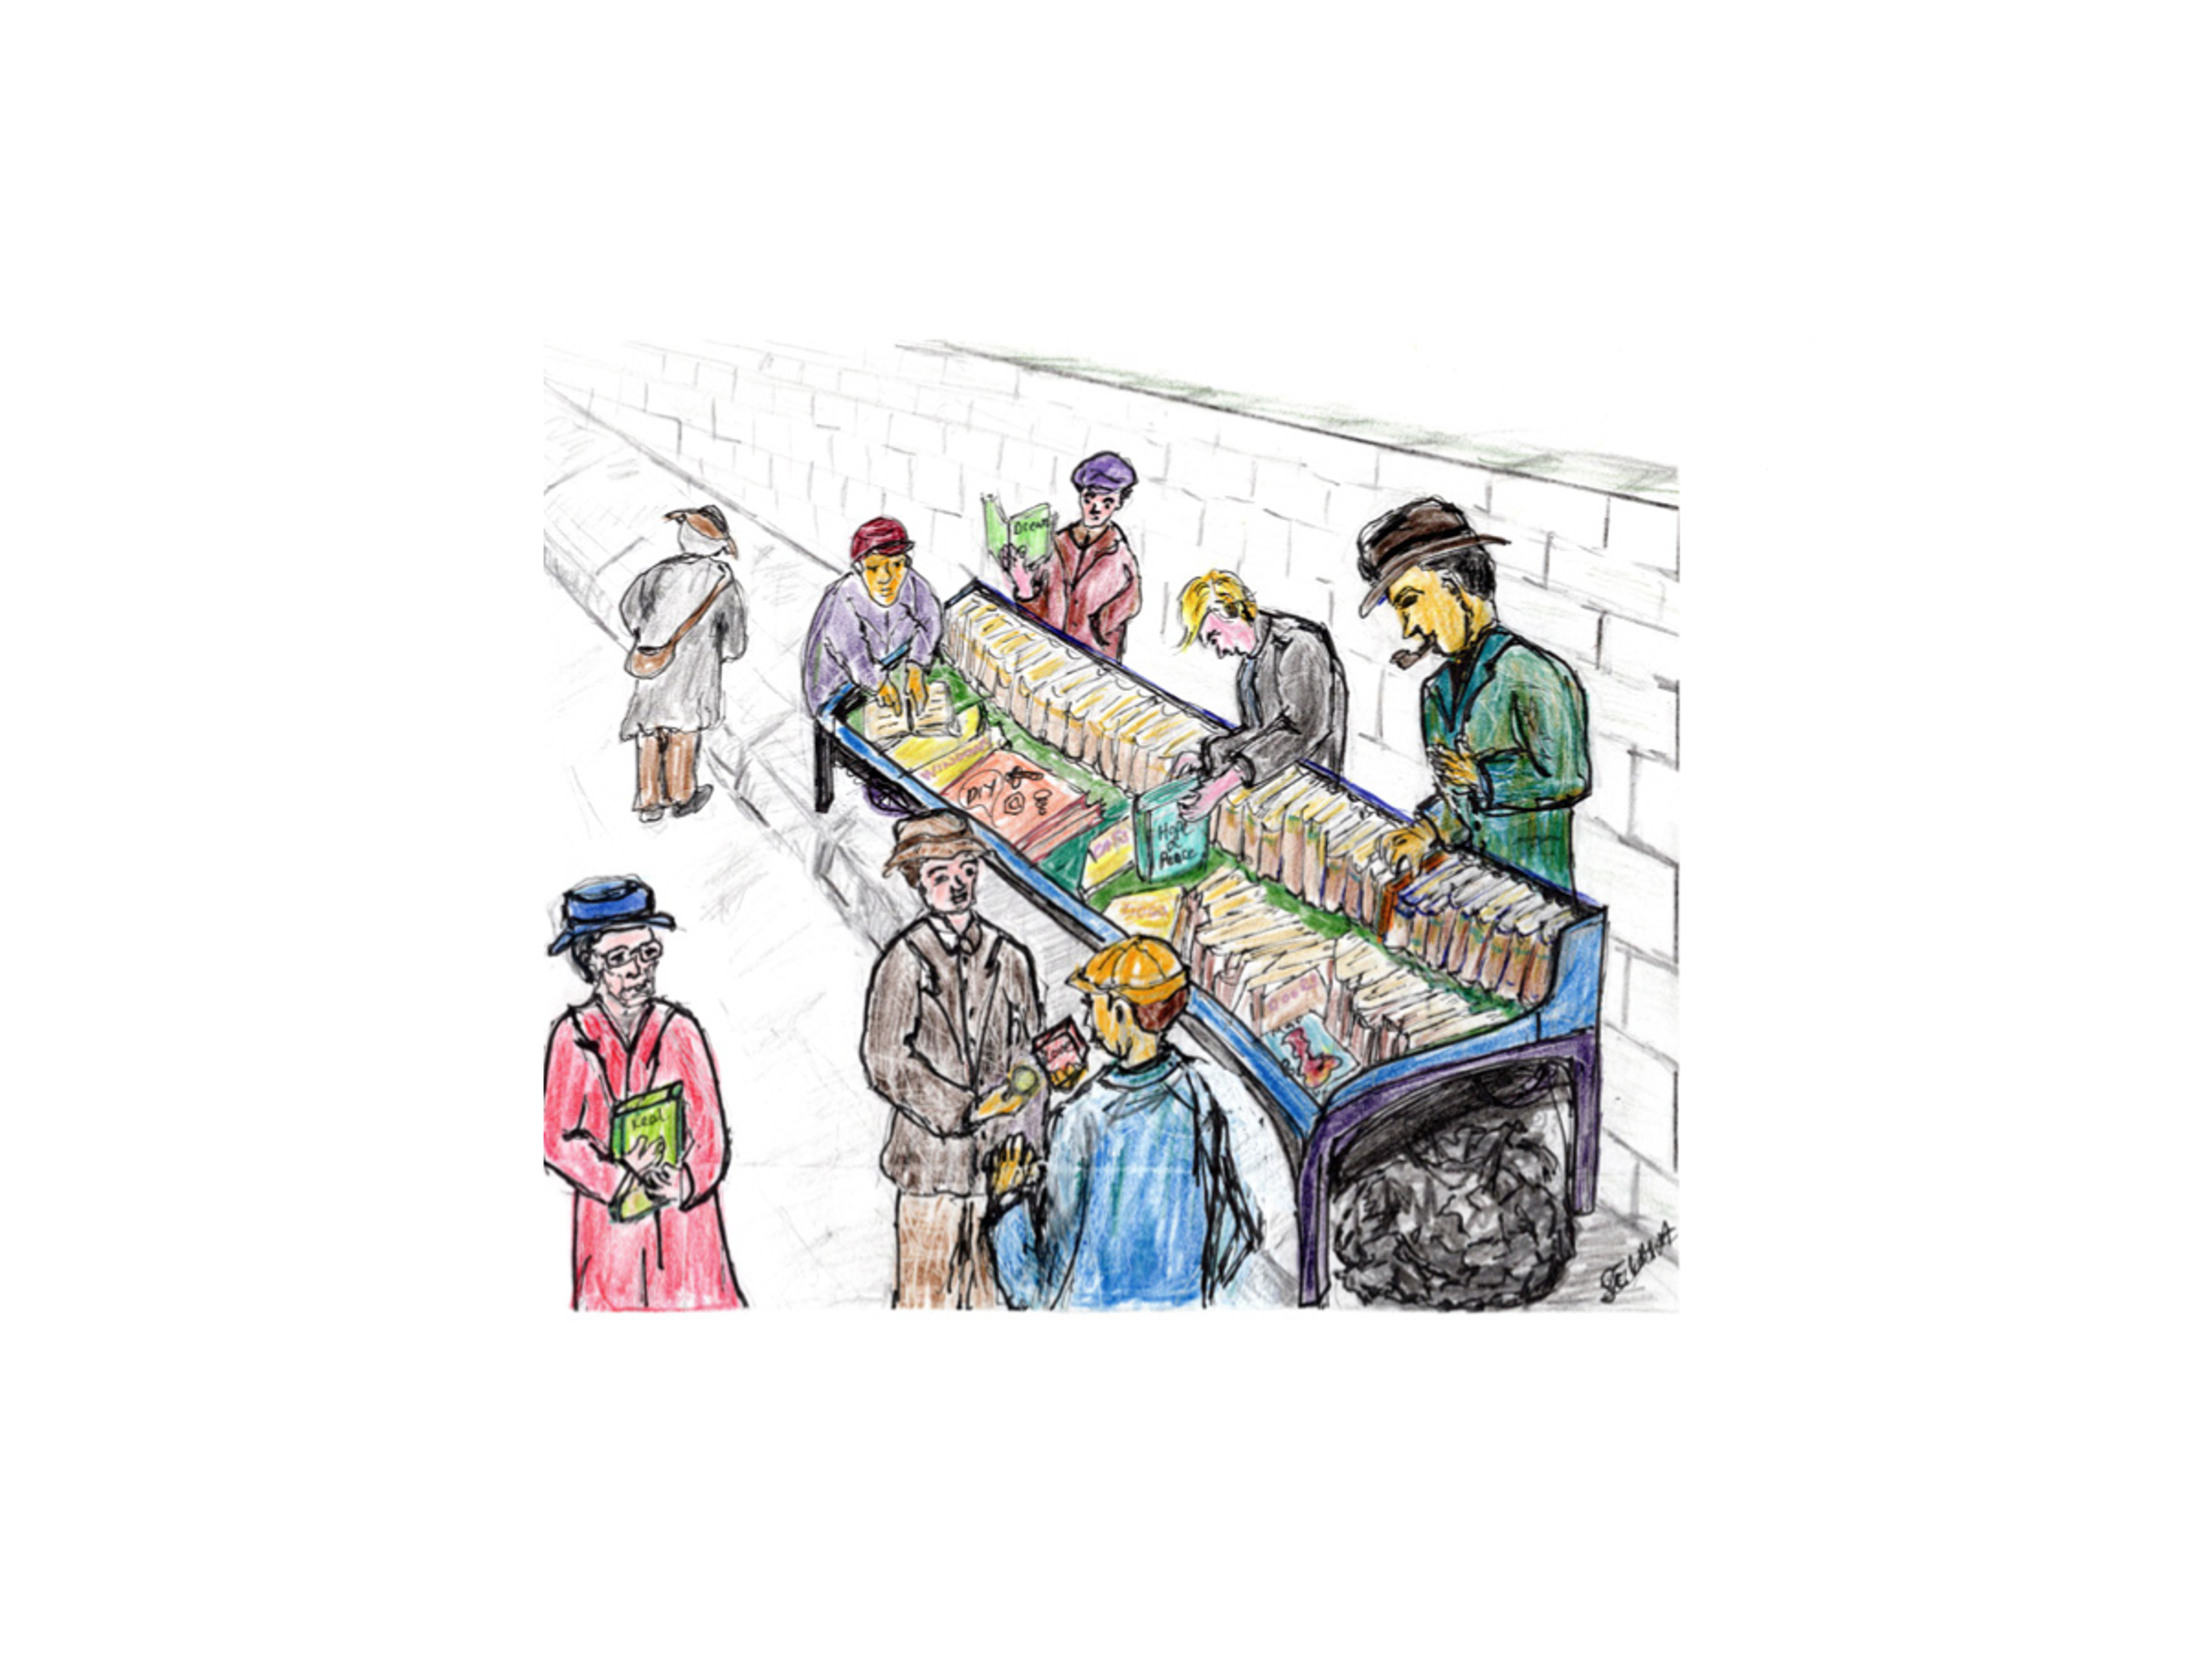 Illustration of people browsing a book stall